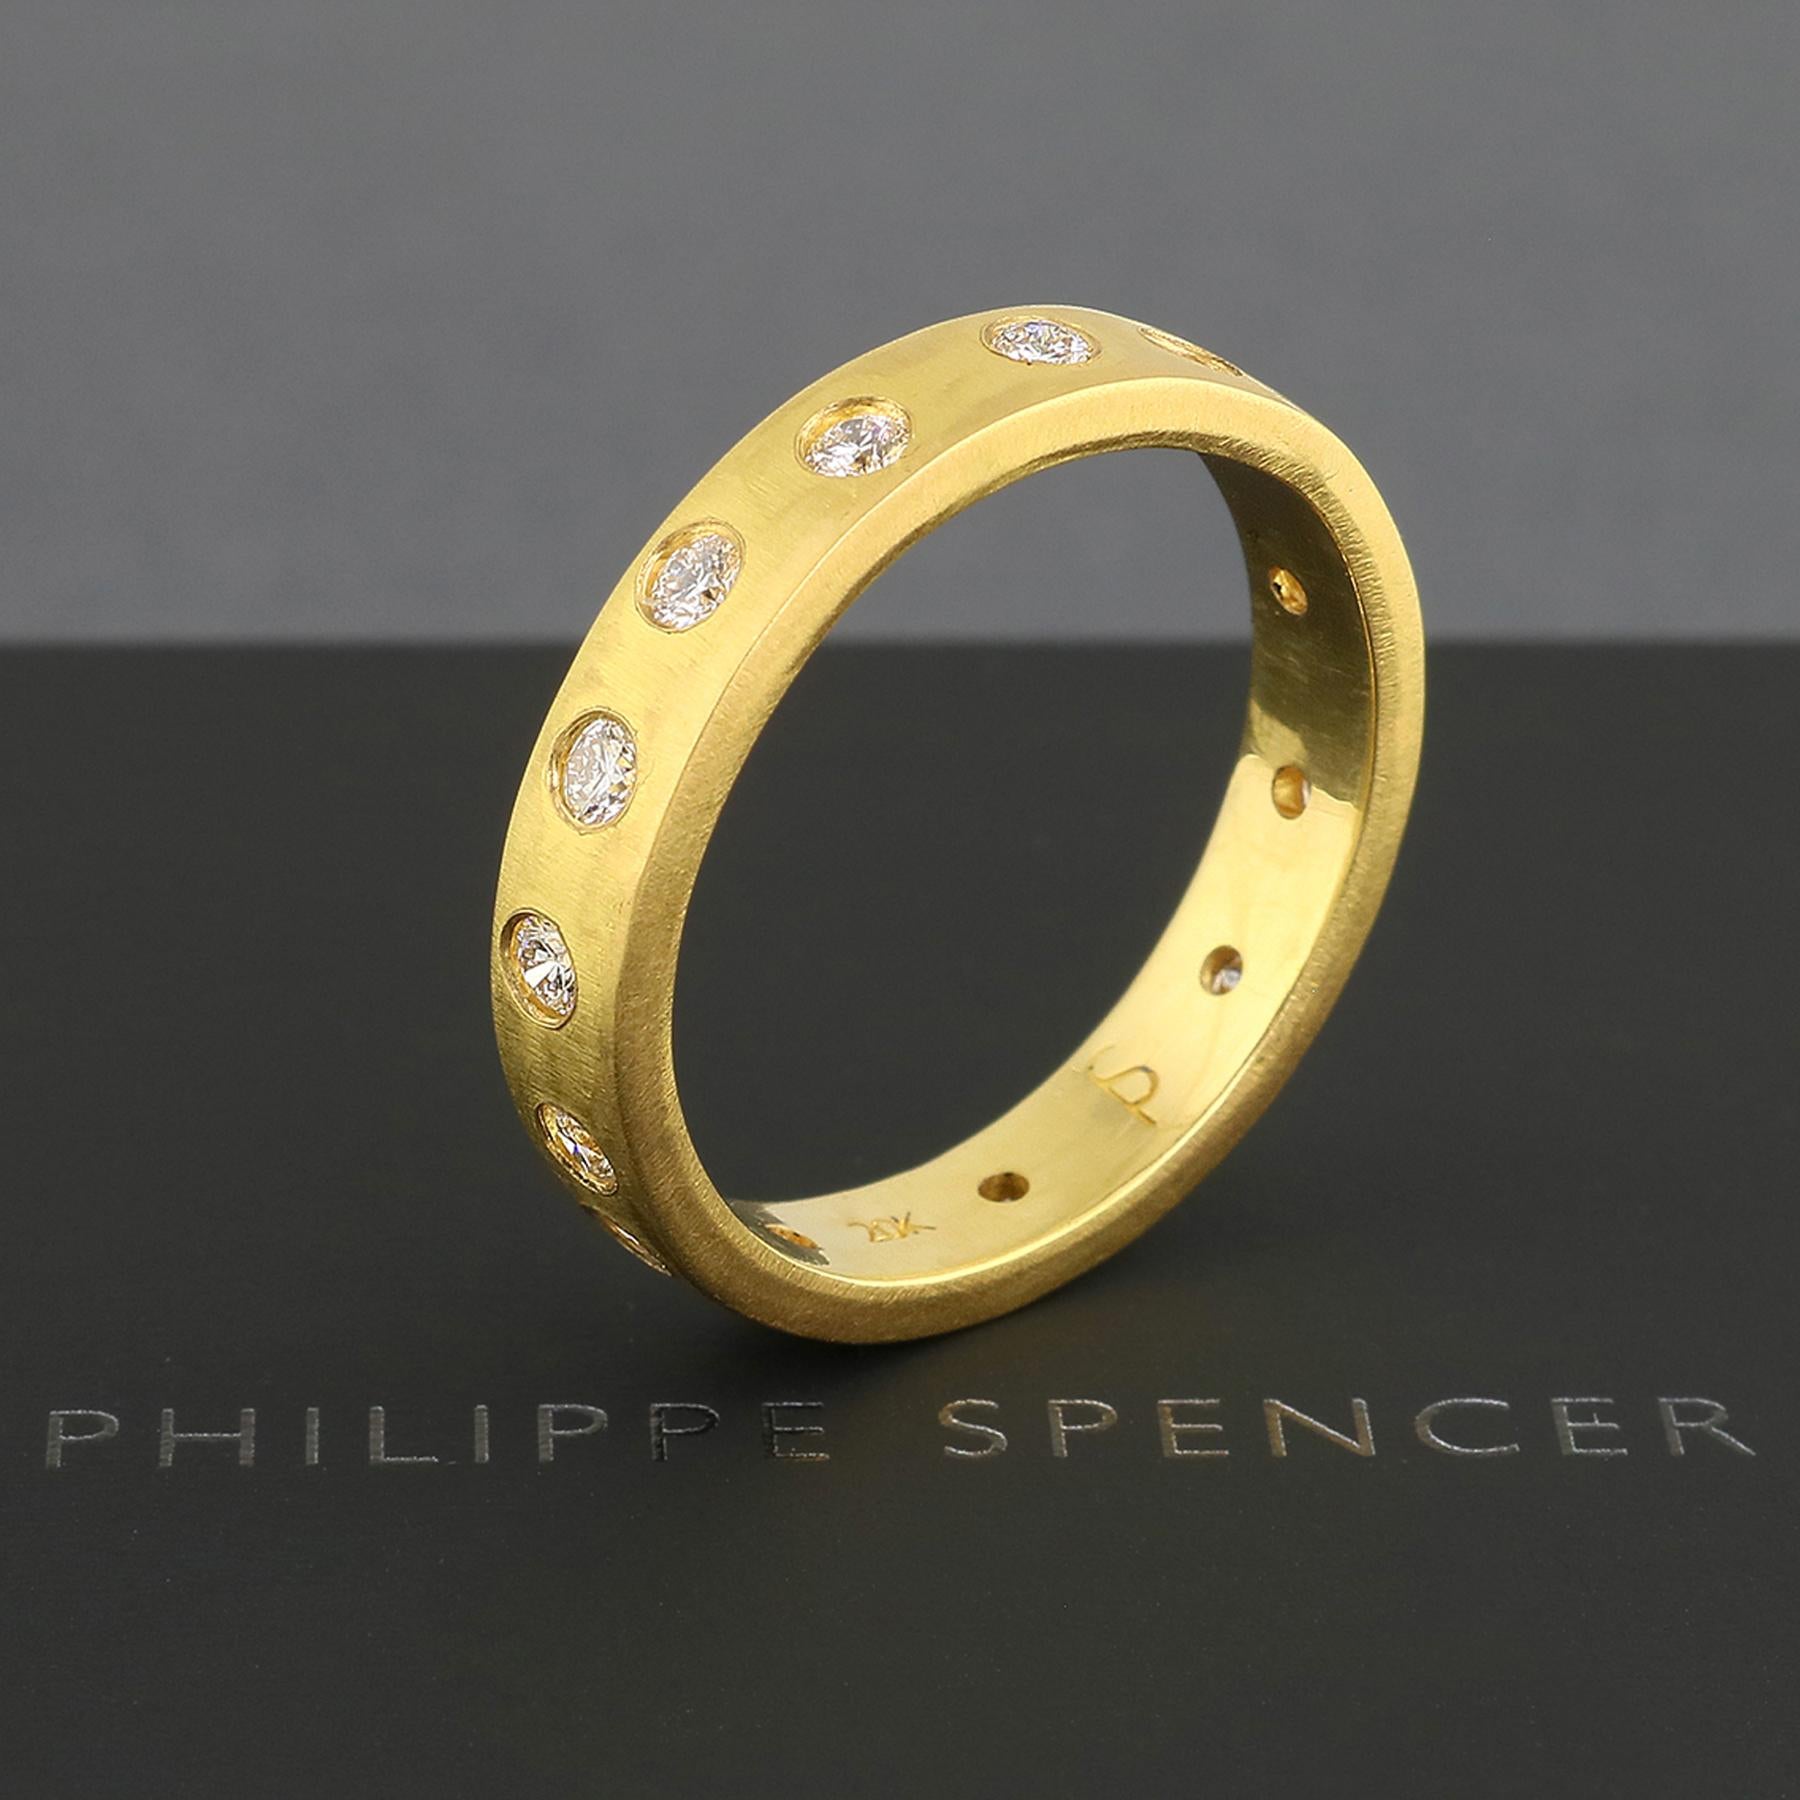 For Sale:  PHILIPPE SPENCER 20K Gold 5x2mm Band & “Lucky 13” COLORLESS Diamonds  2